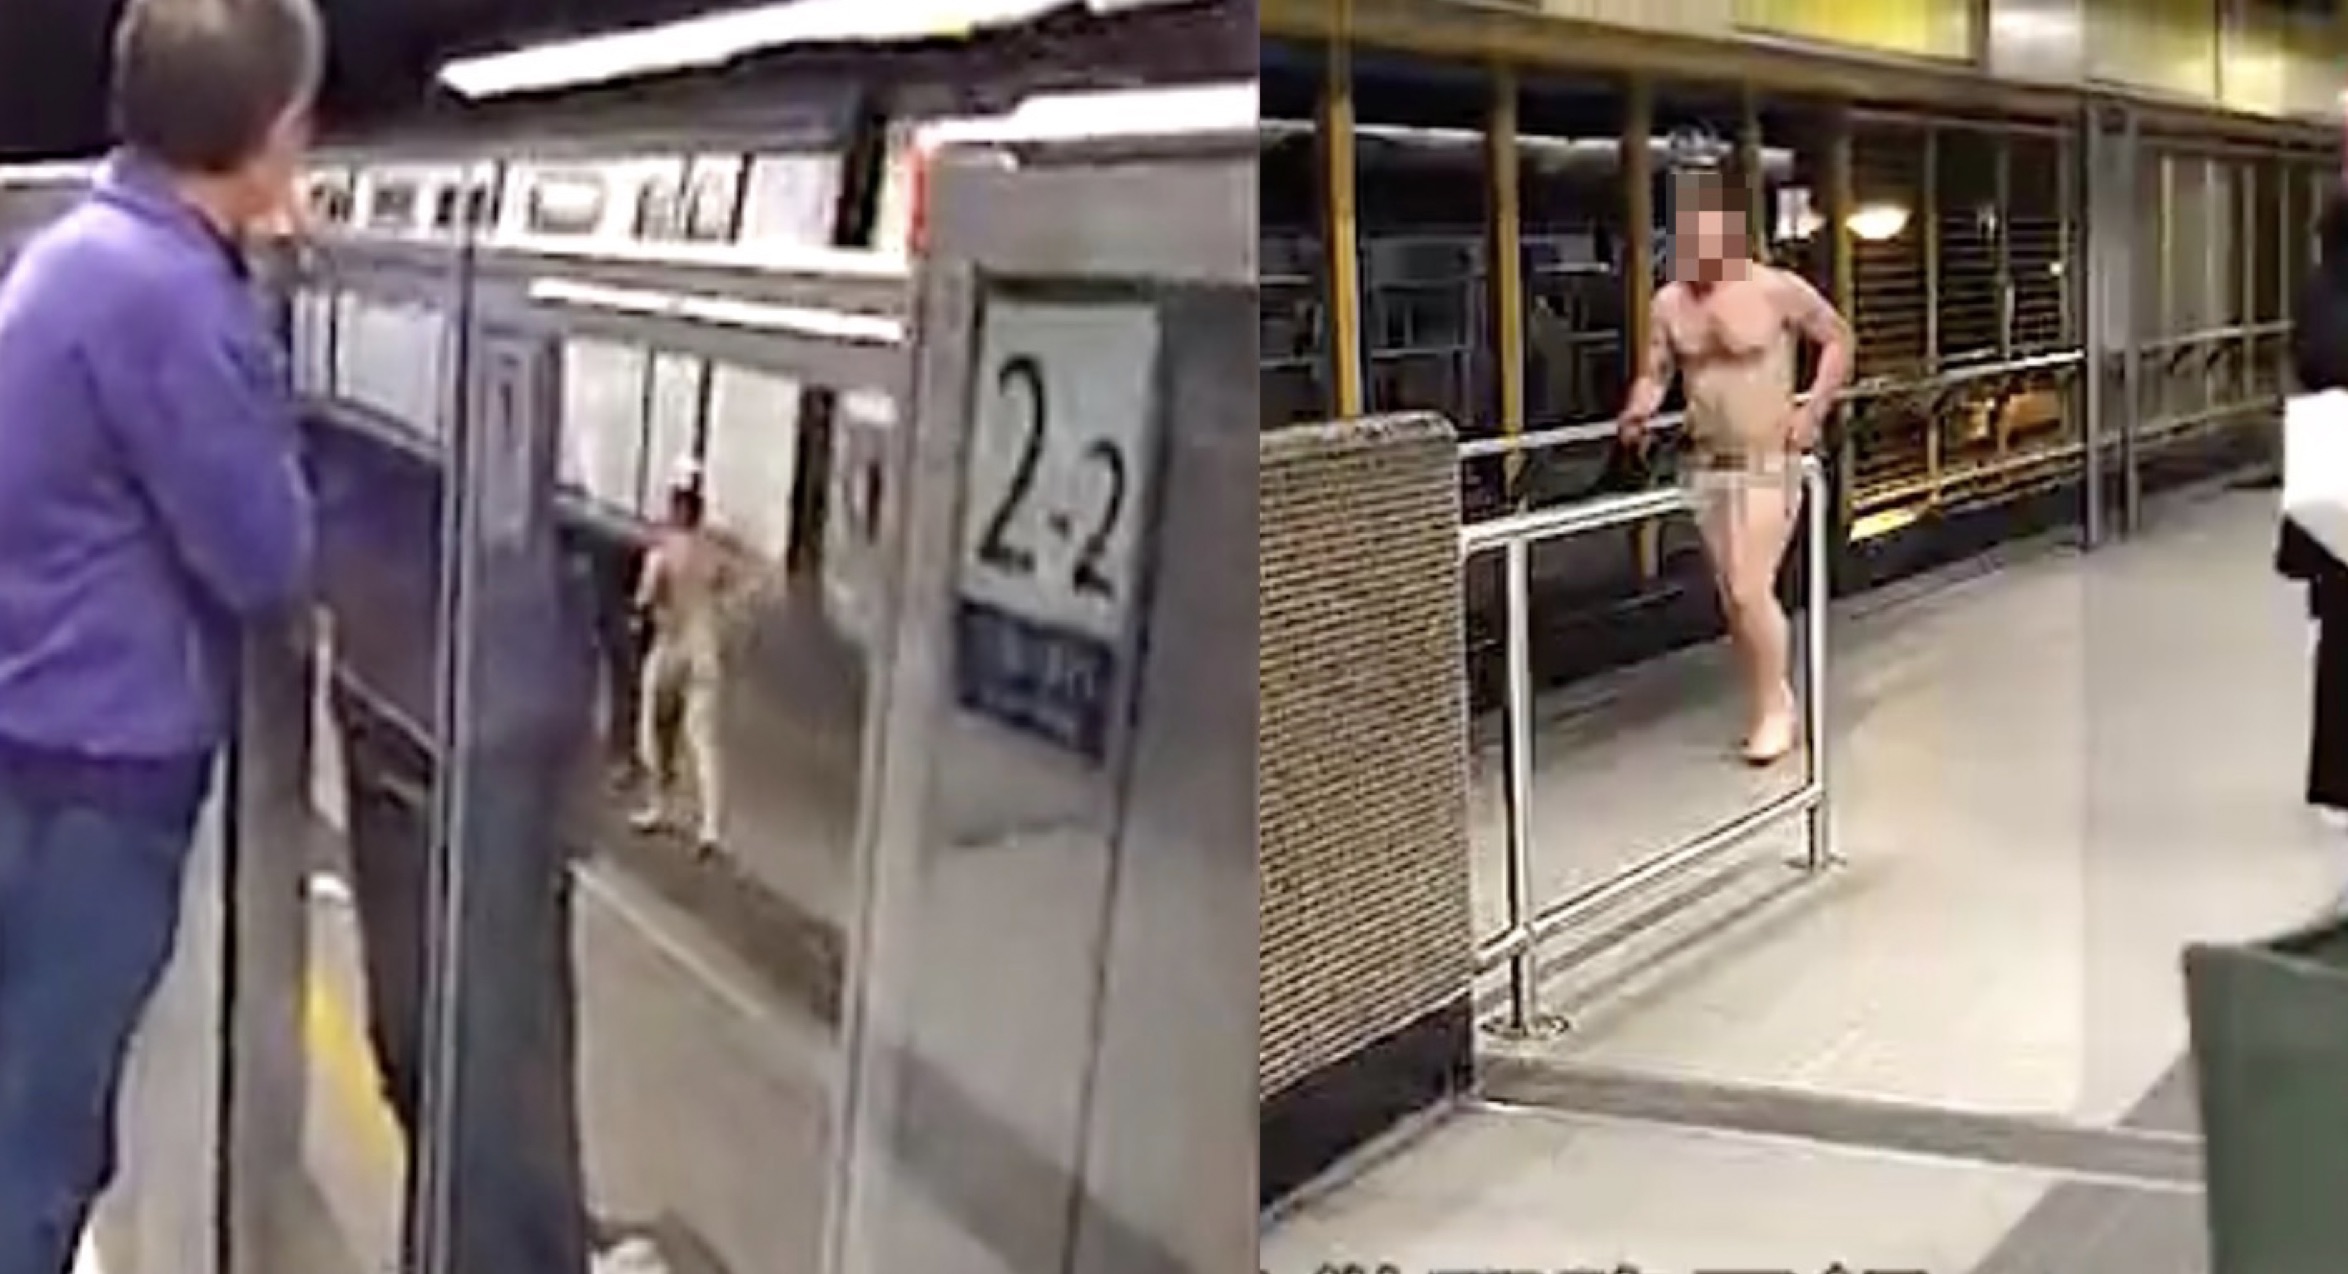 Naked man spotted running along the train tracks from Lai King to Kwai Hing. Screengrabs via Apple Daily video.